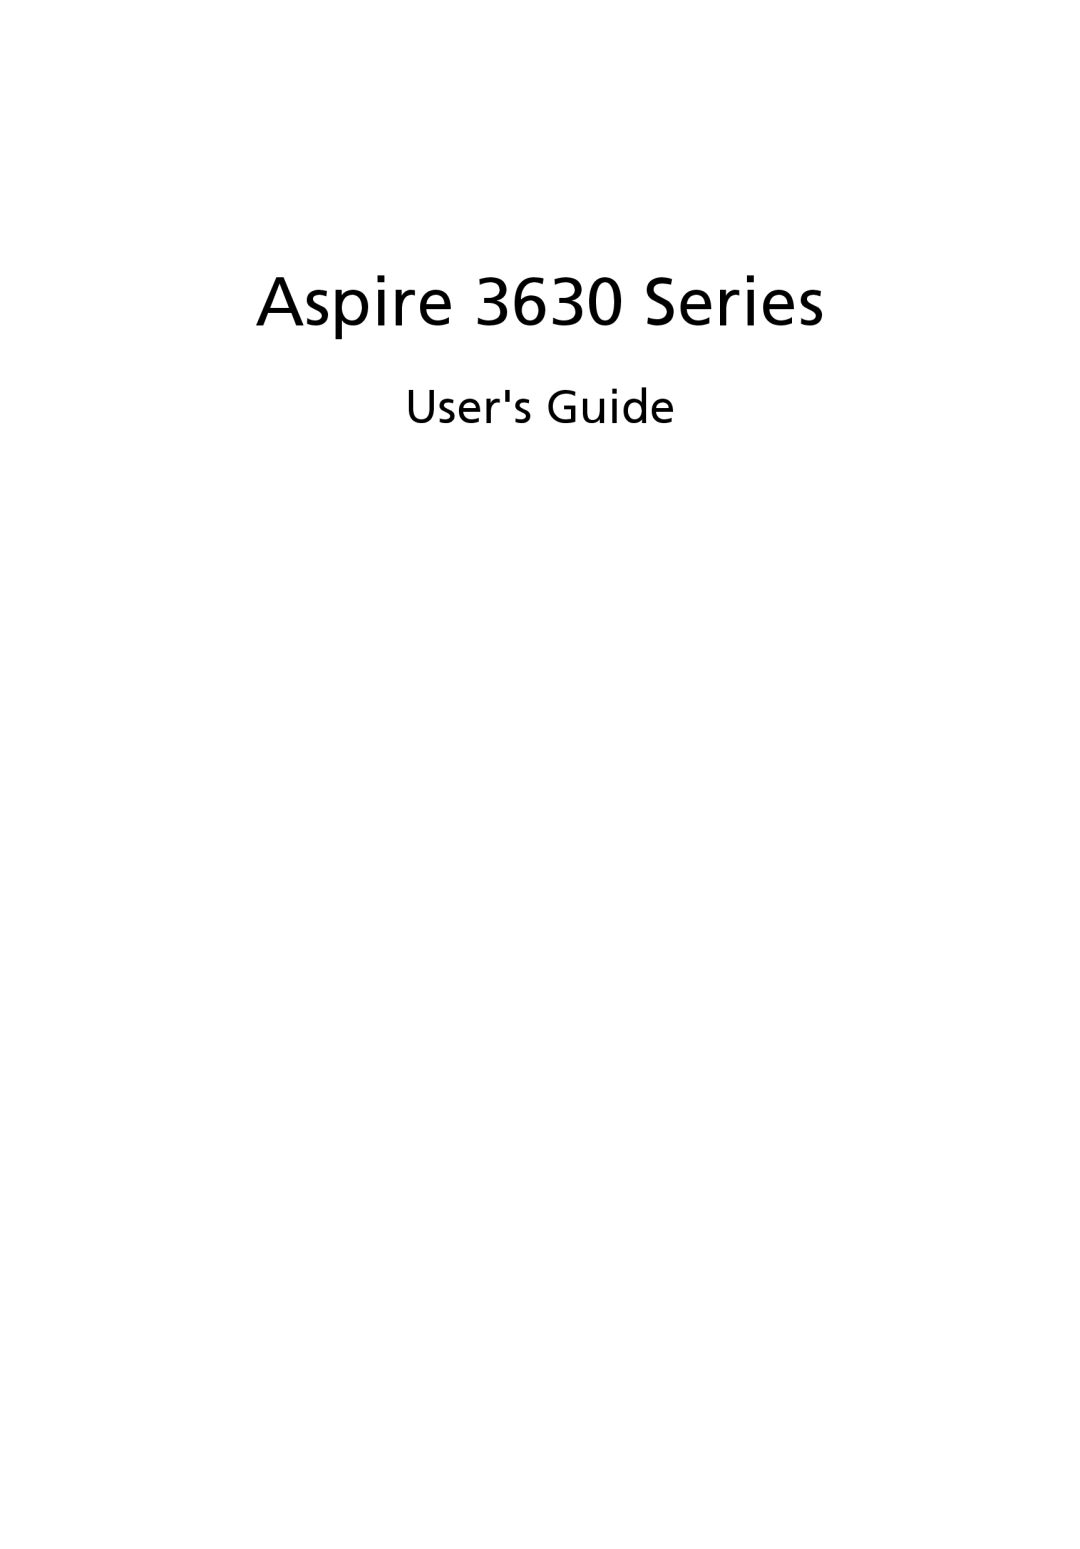 Acer manual Users Guide, Aspire 3630 Series 